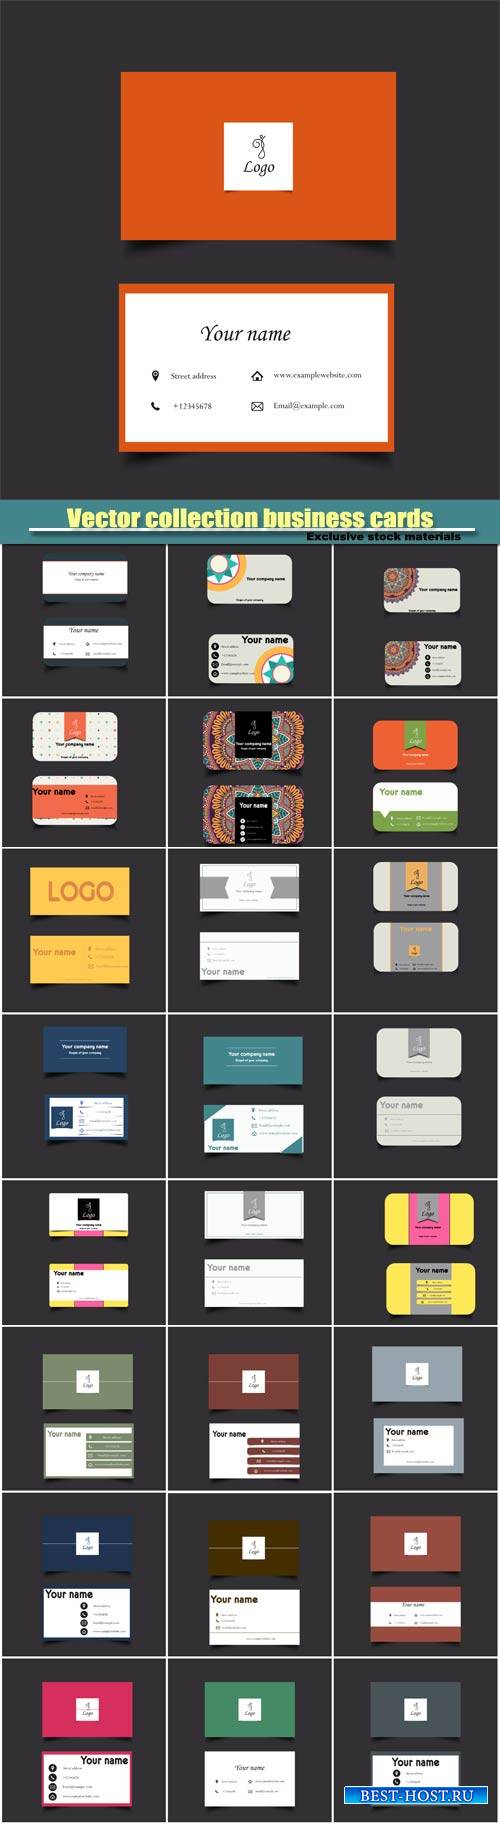 Vector collection business cards